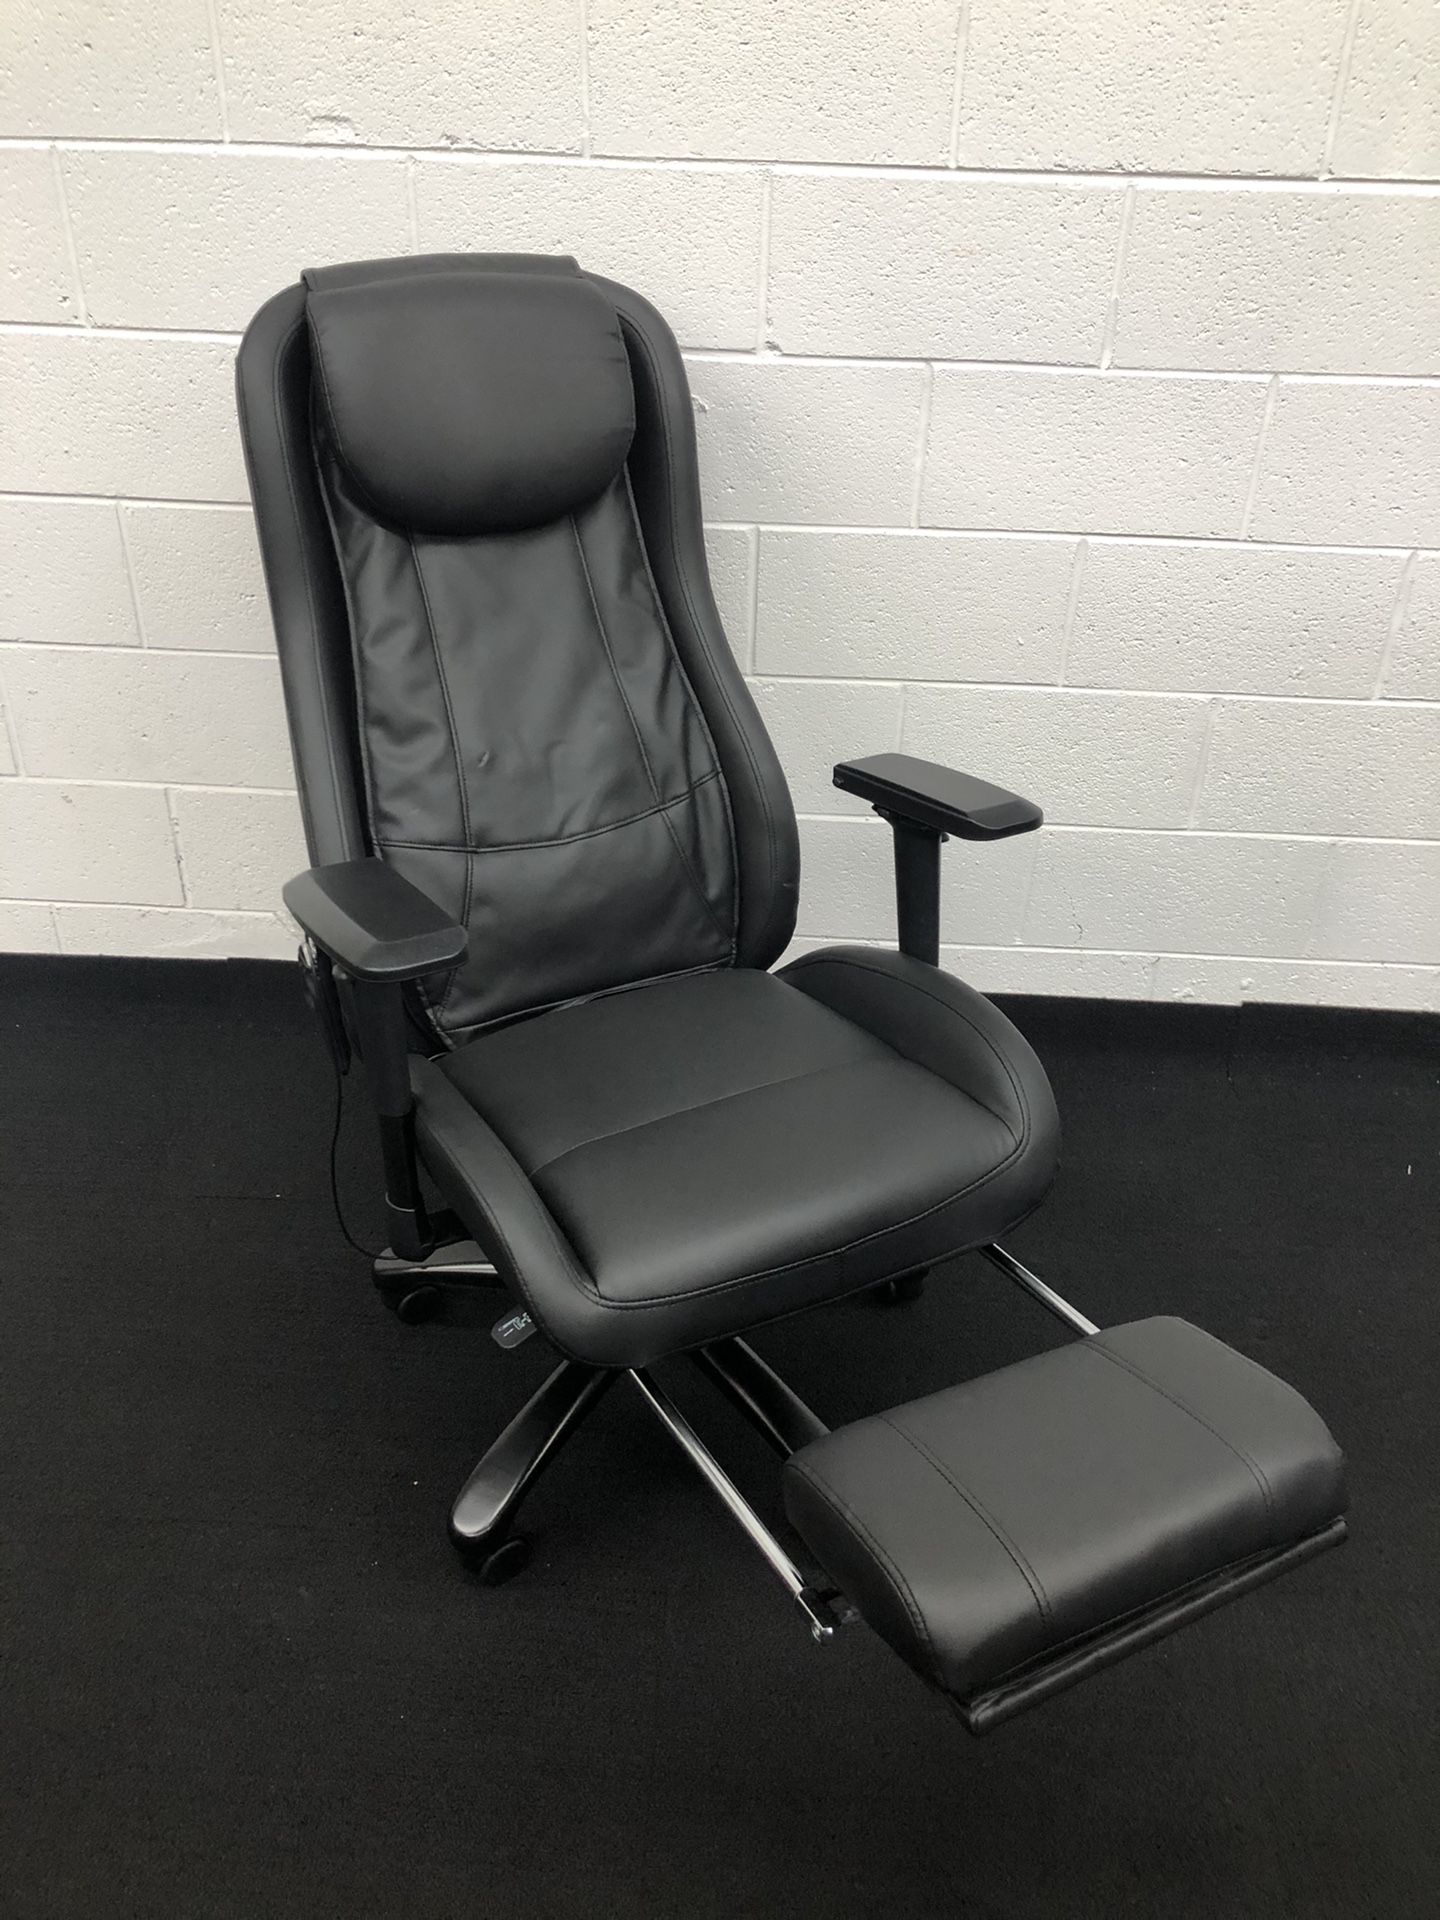 BRAND NEW BLACK ADJUSTABLE EXECUTIVE OFFICE CHAIR WITH BUILT IN MASSAGE